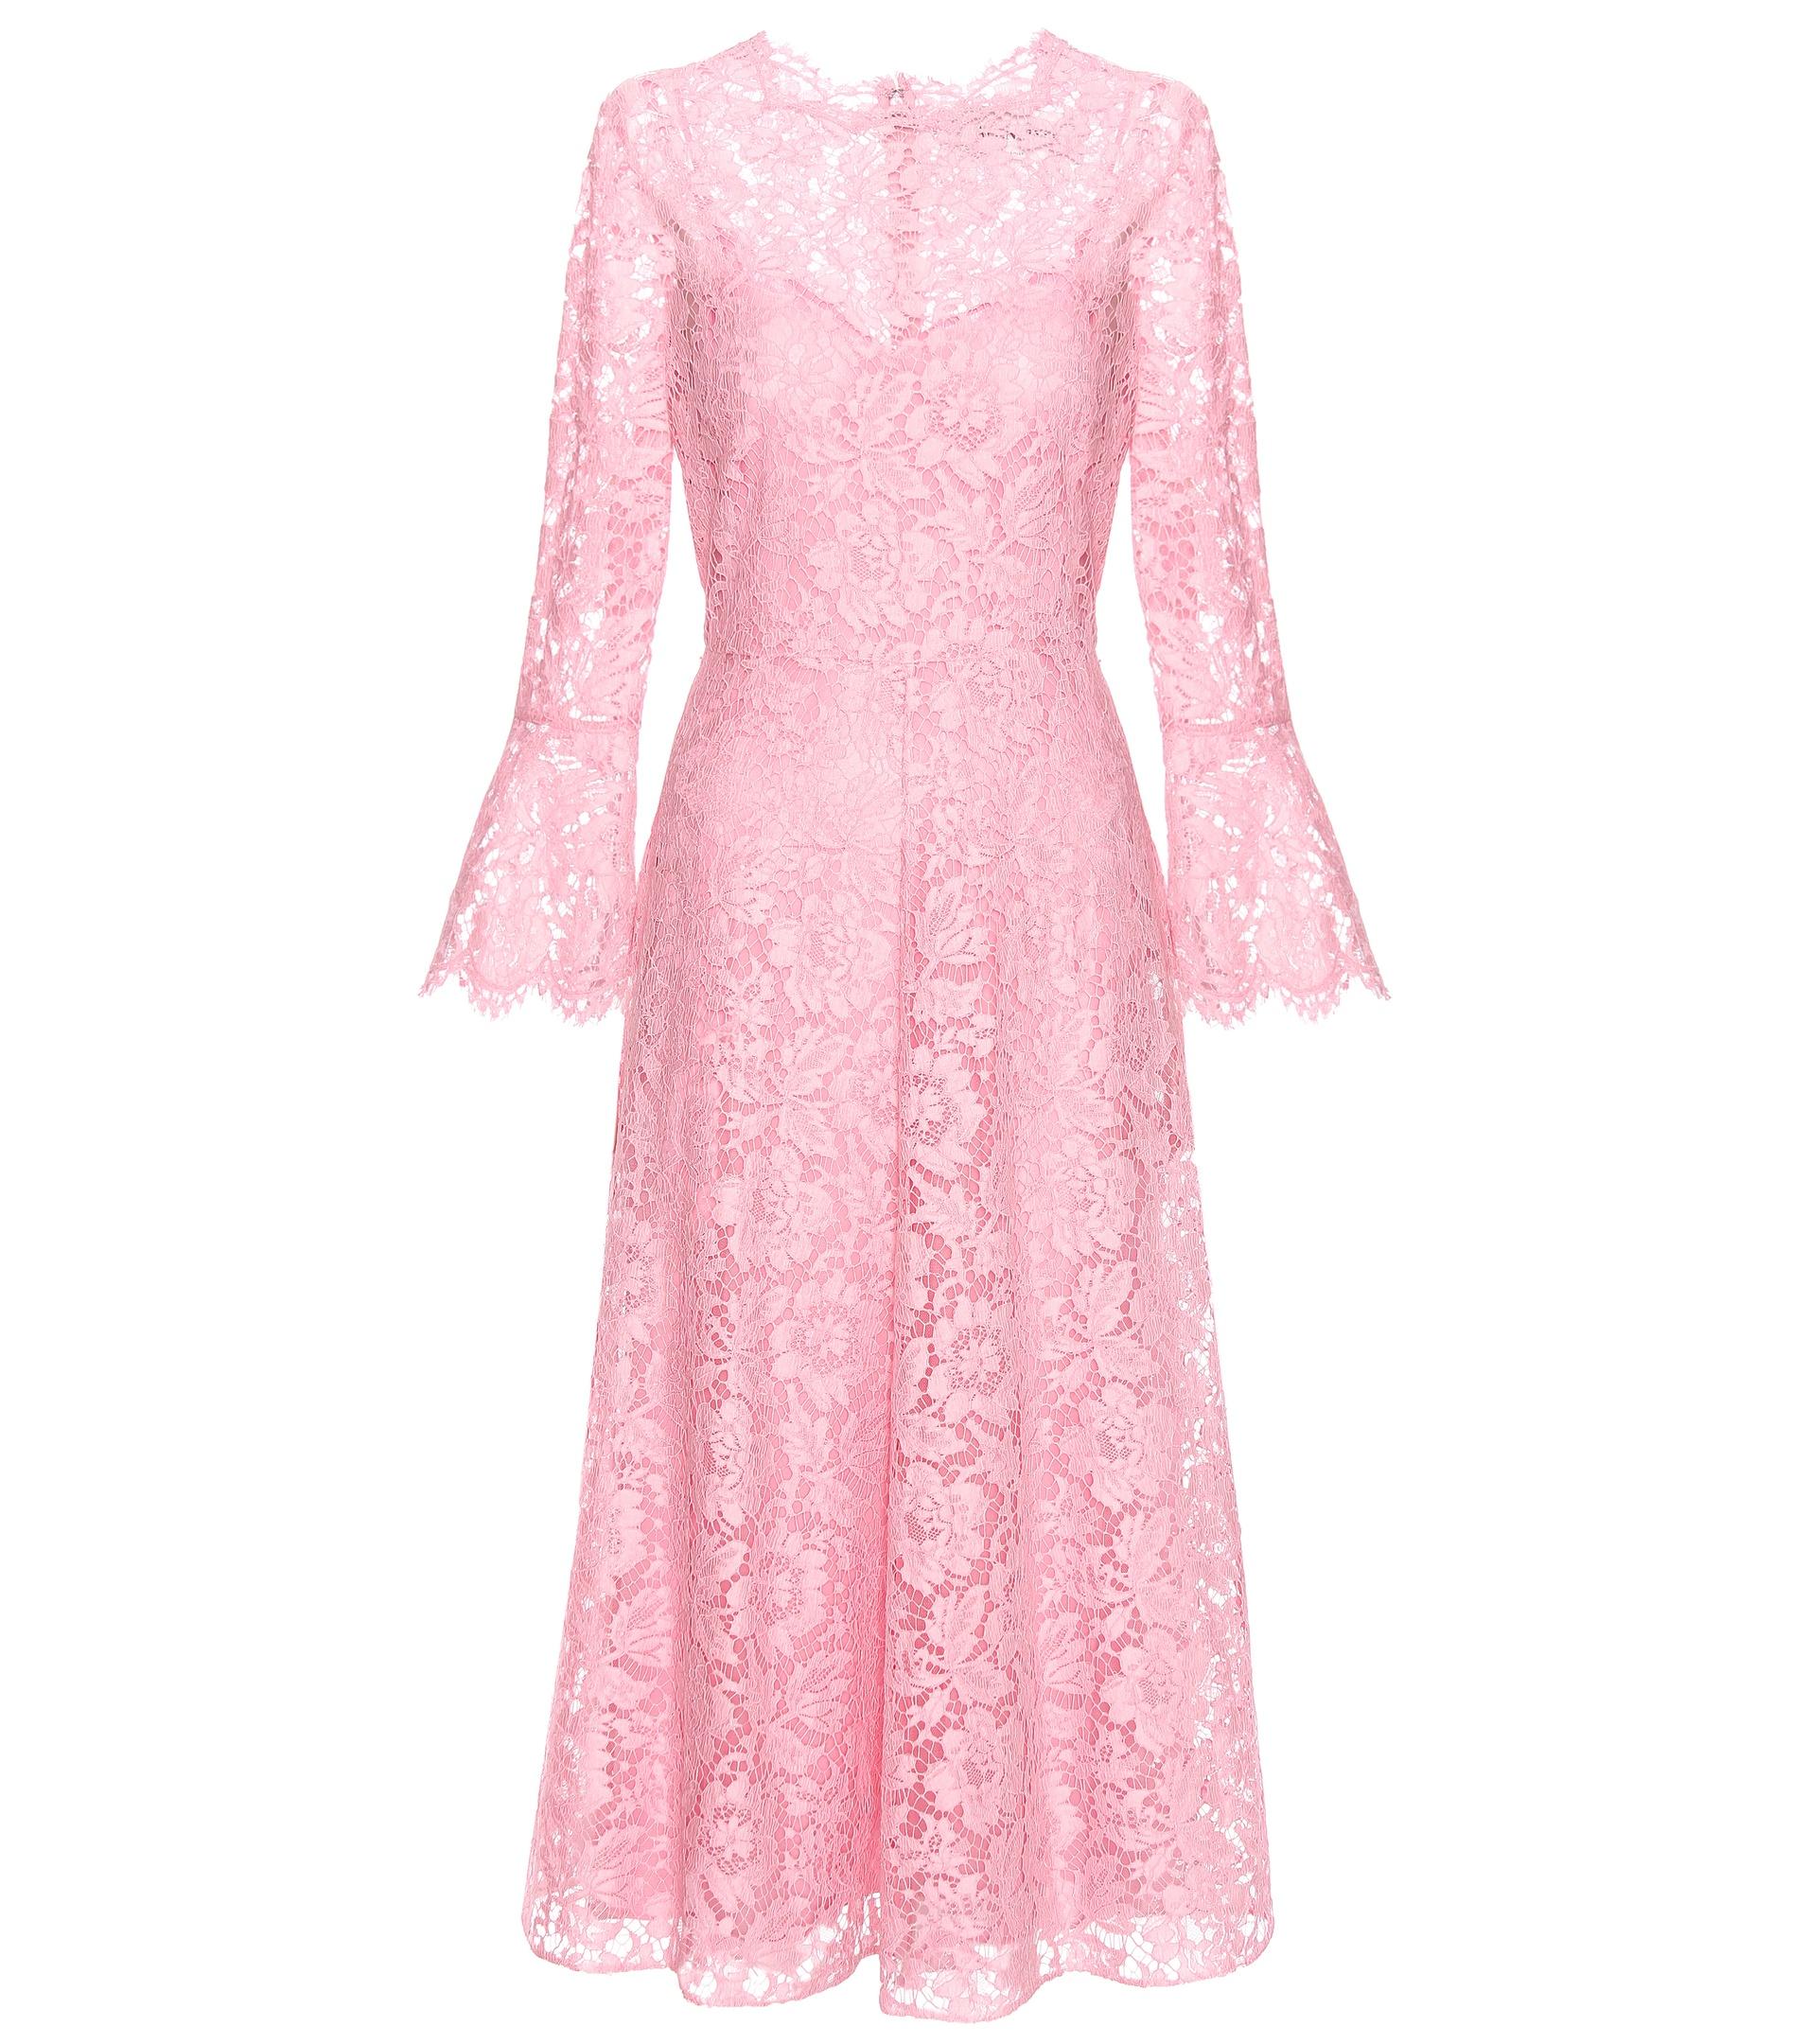 Valentino Lace Dress in Pink - Lyst